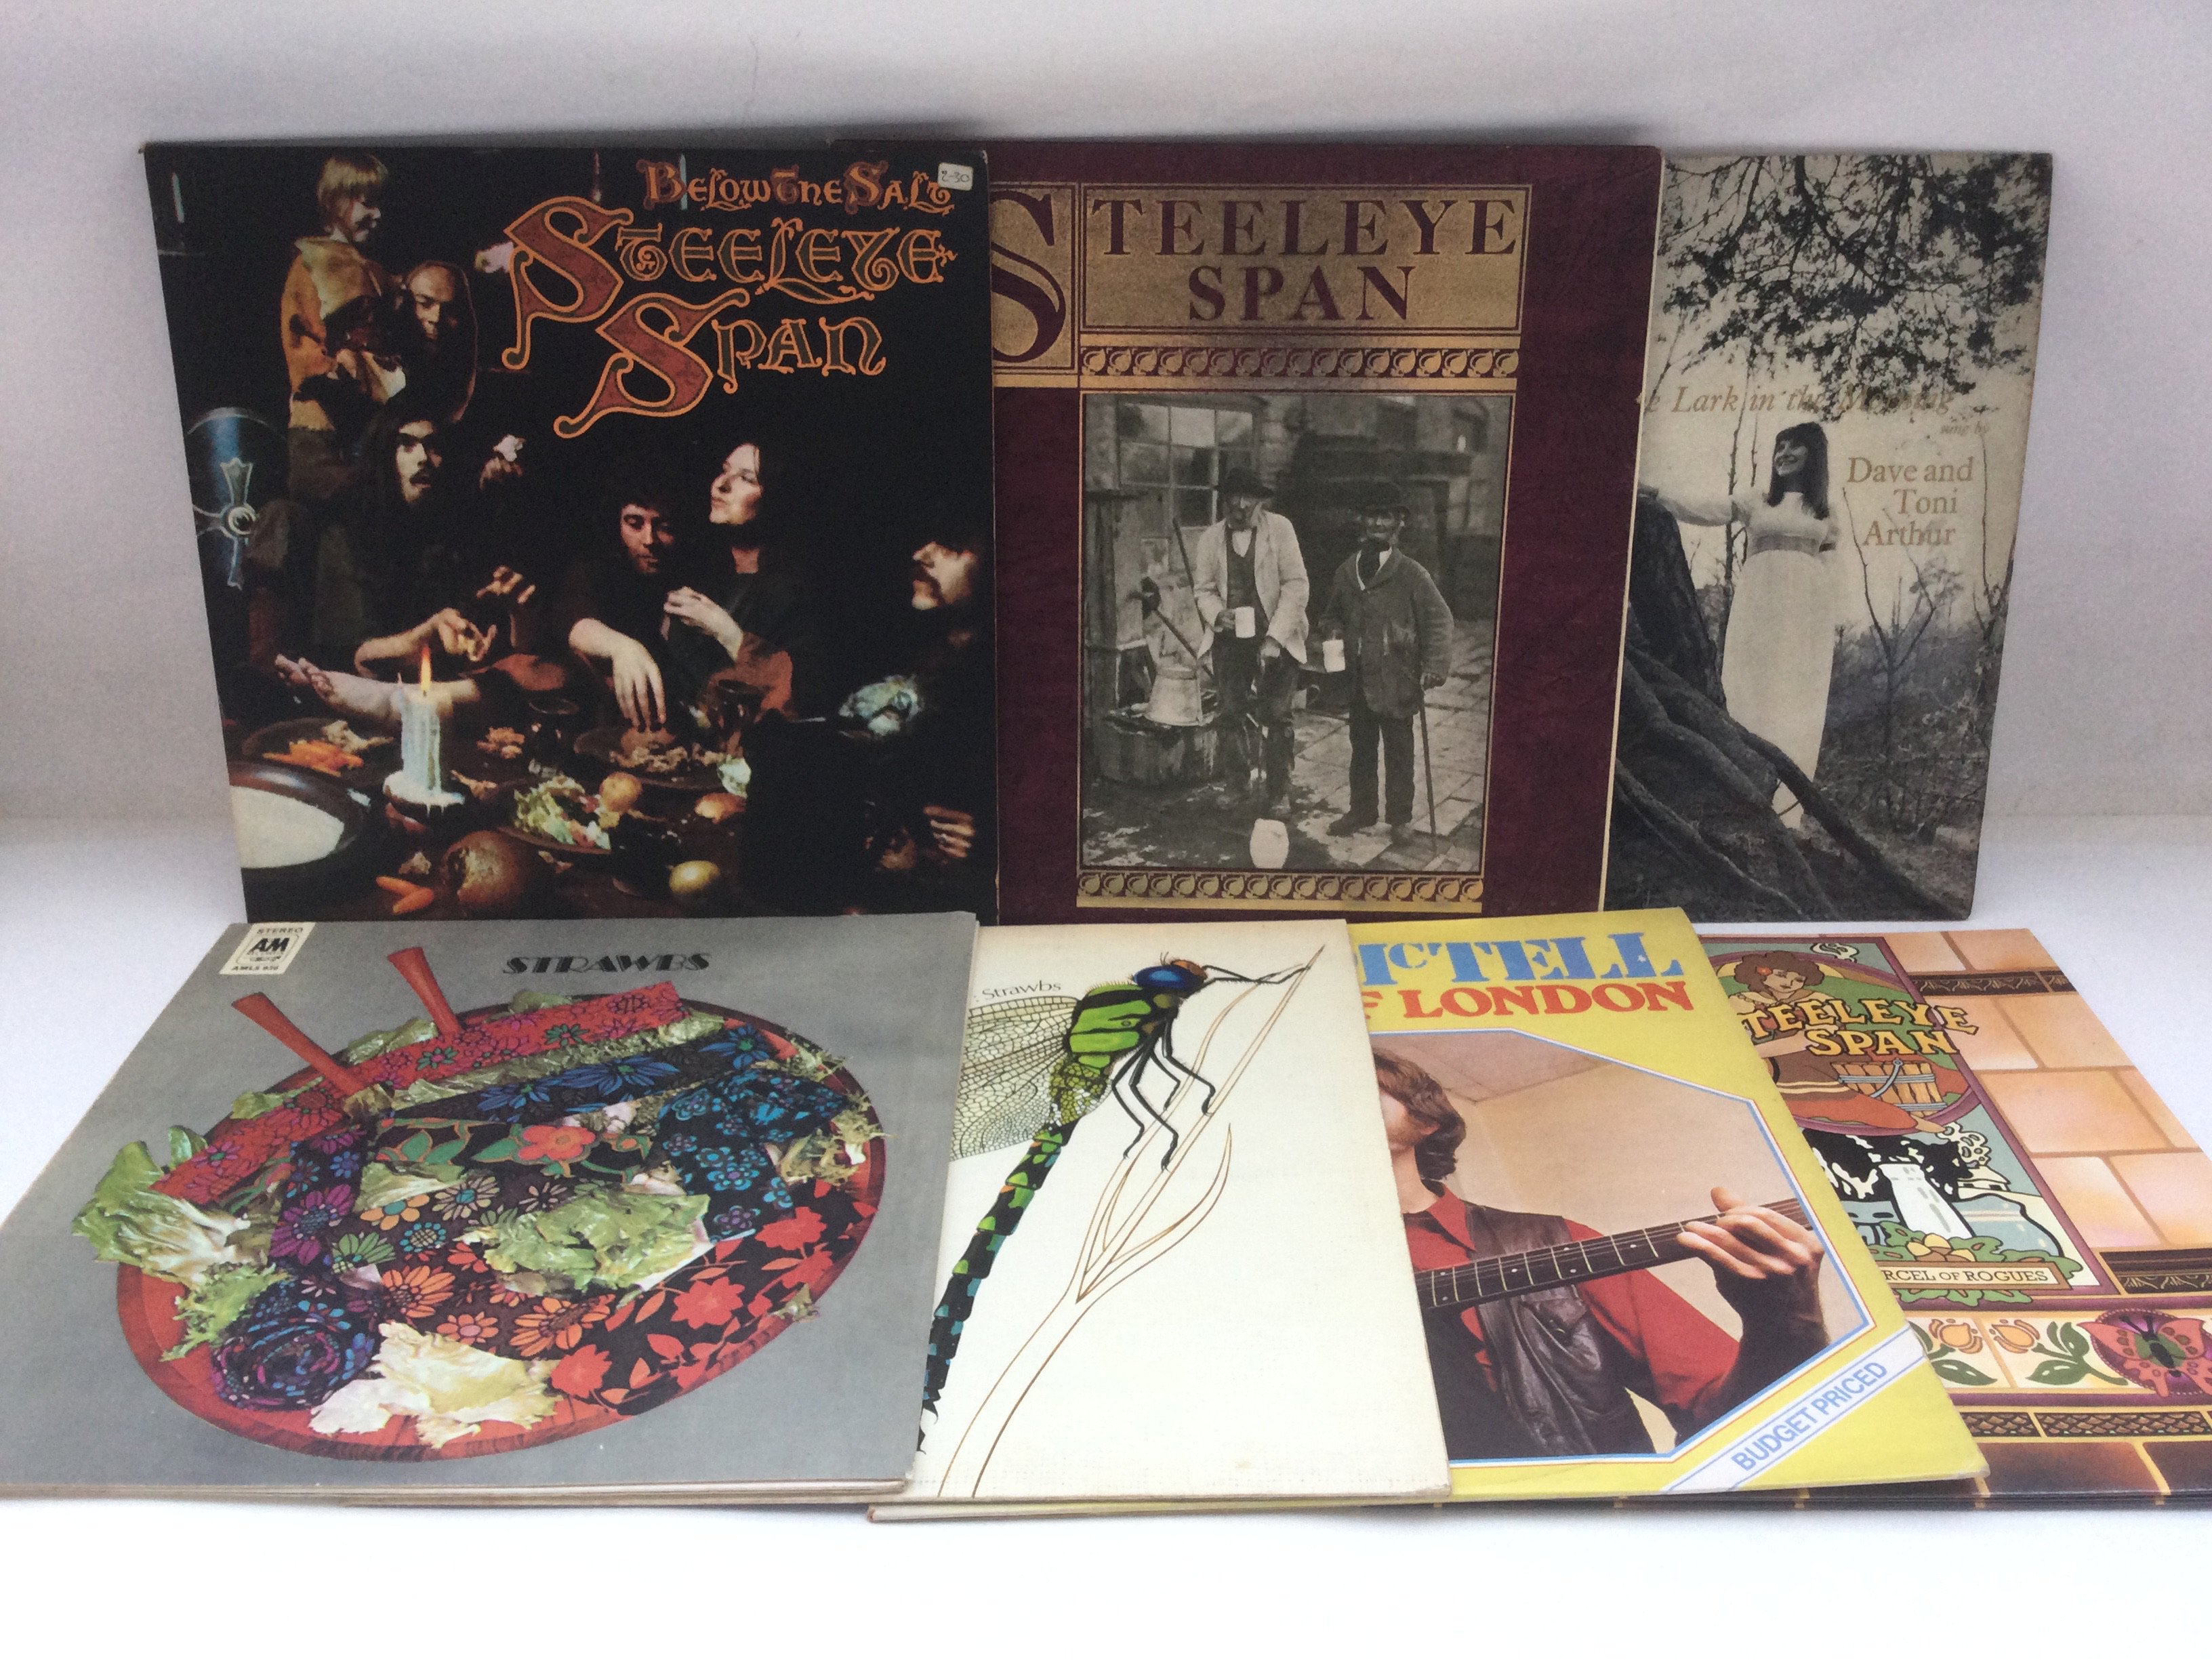 Sixteen folk rock LPs by various artists including